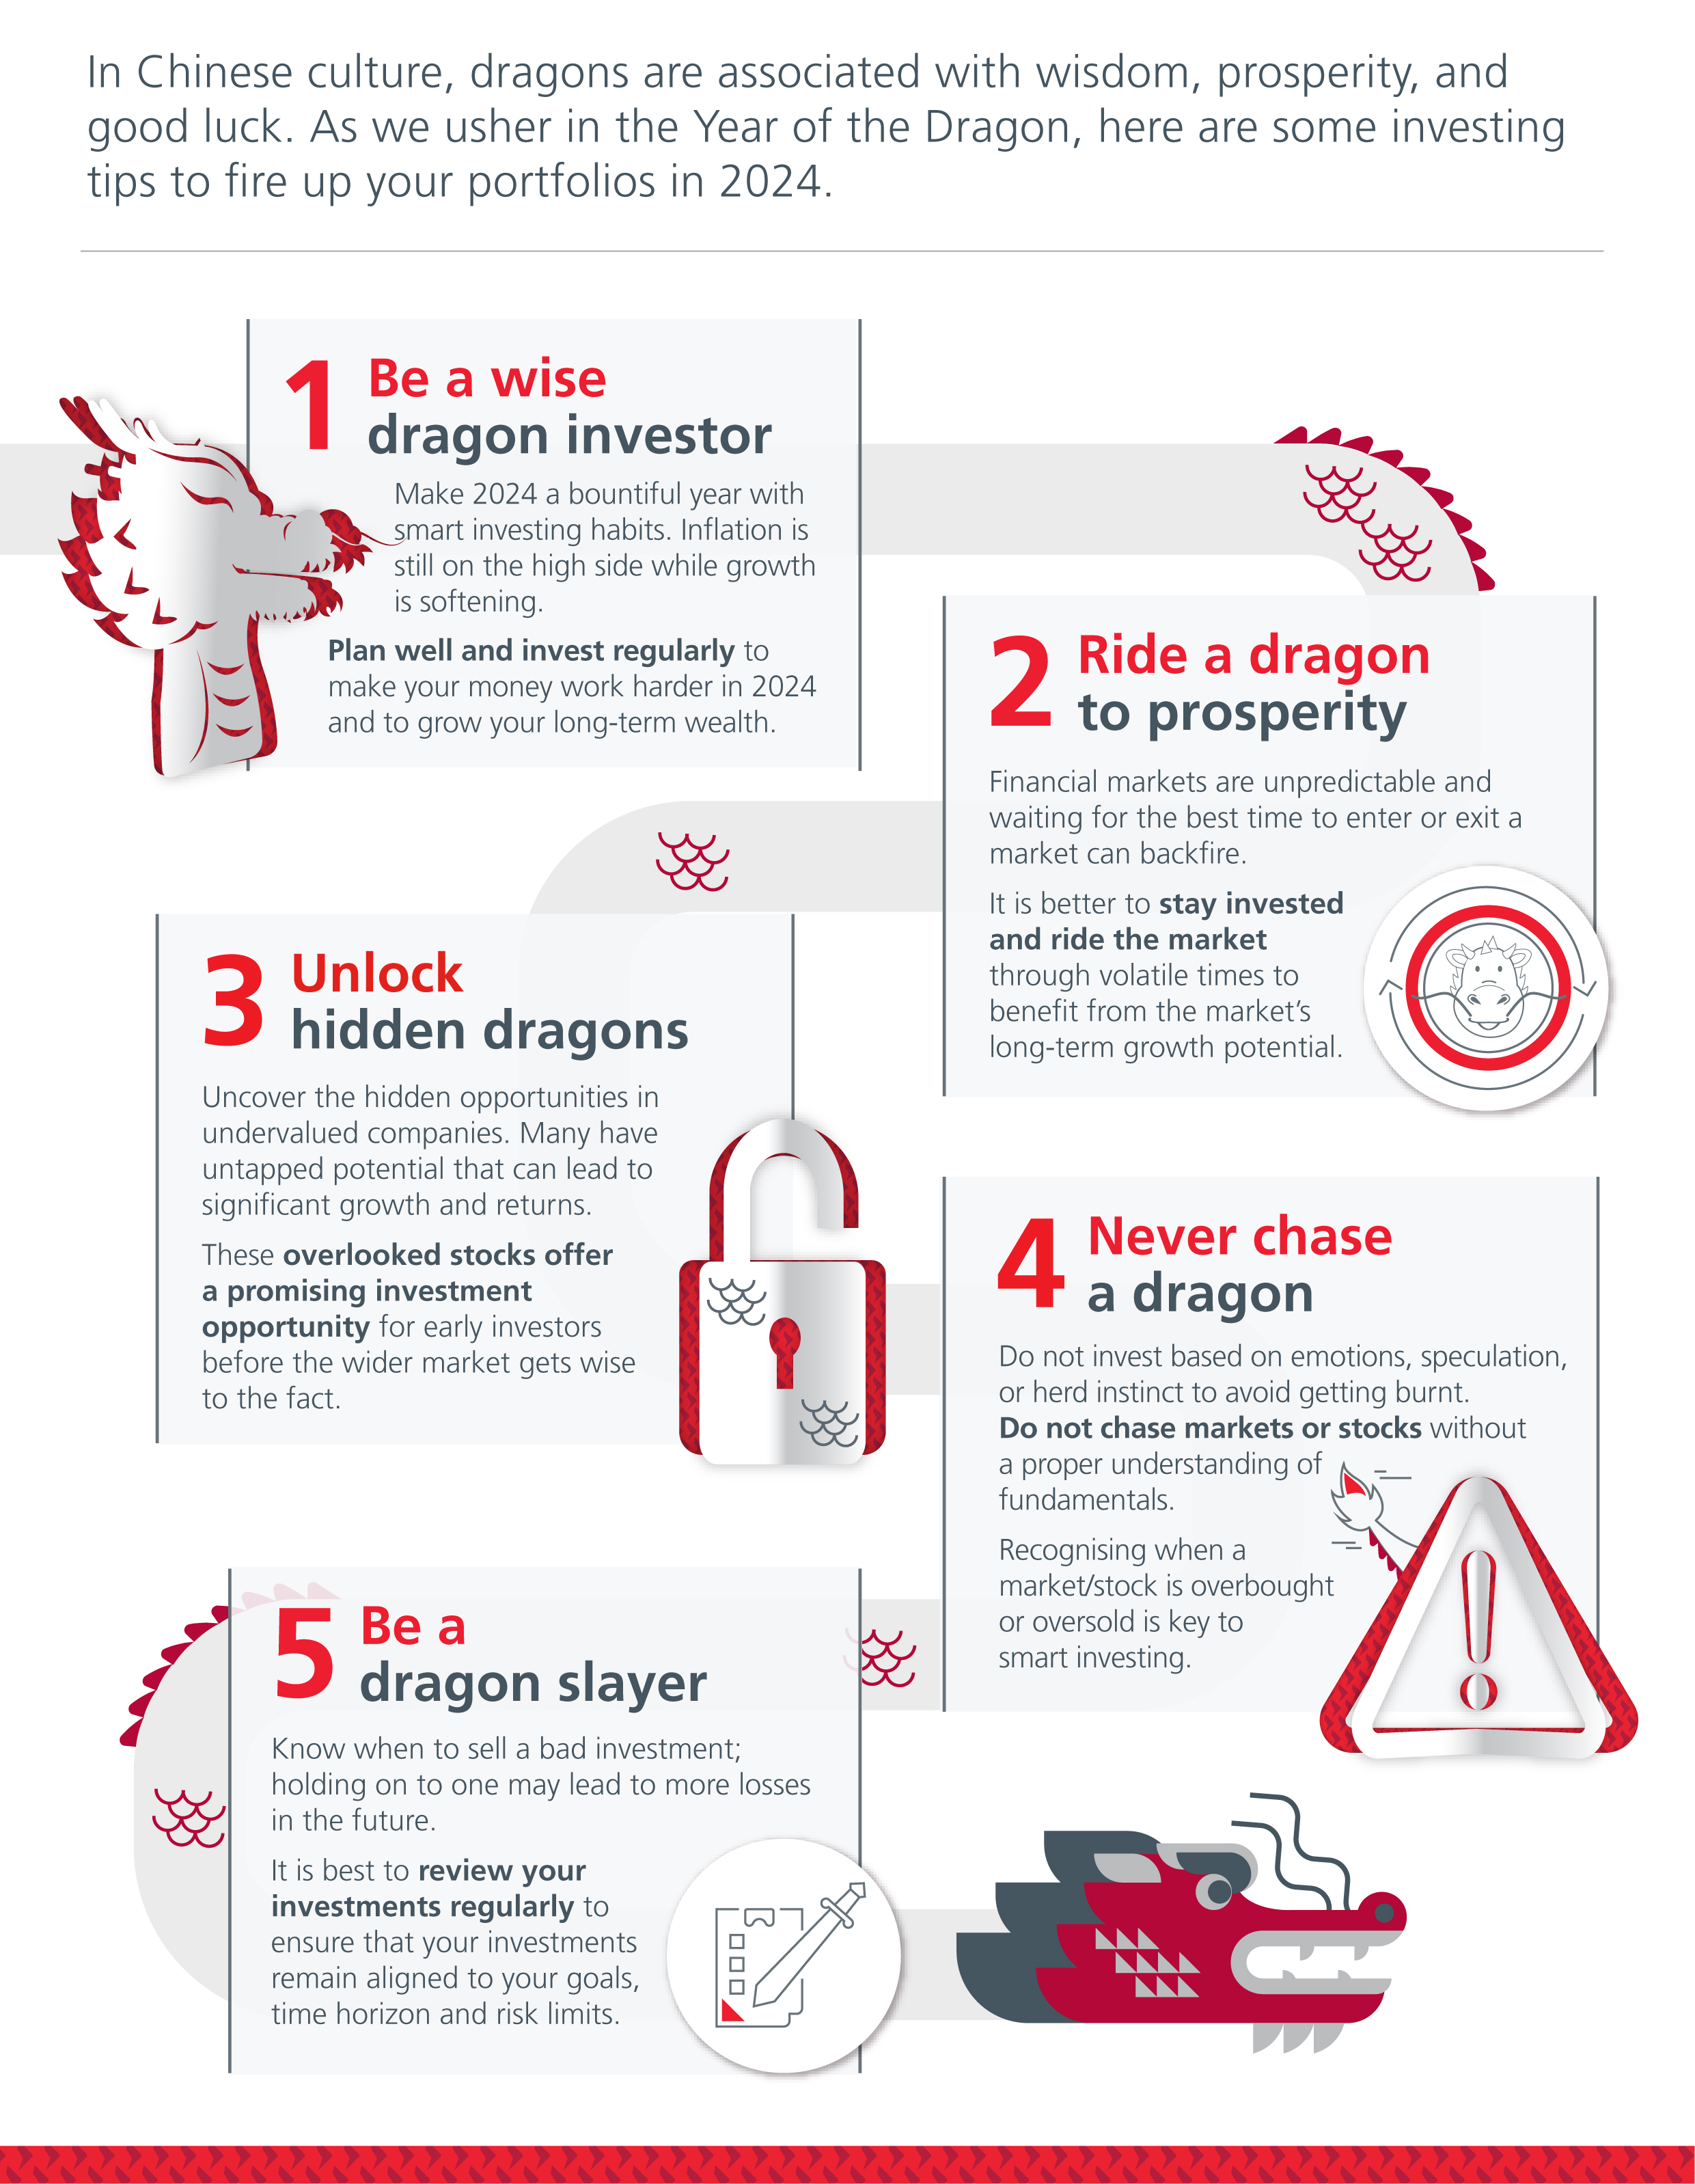 Investing tips for the Year of the Dragon